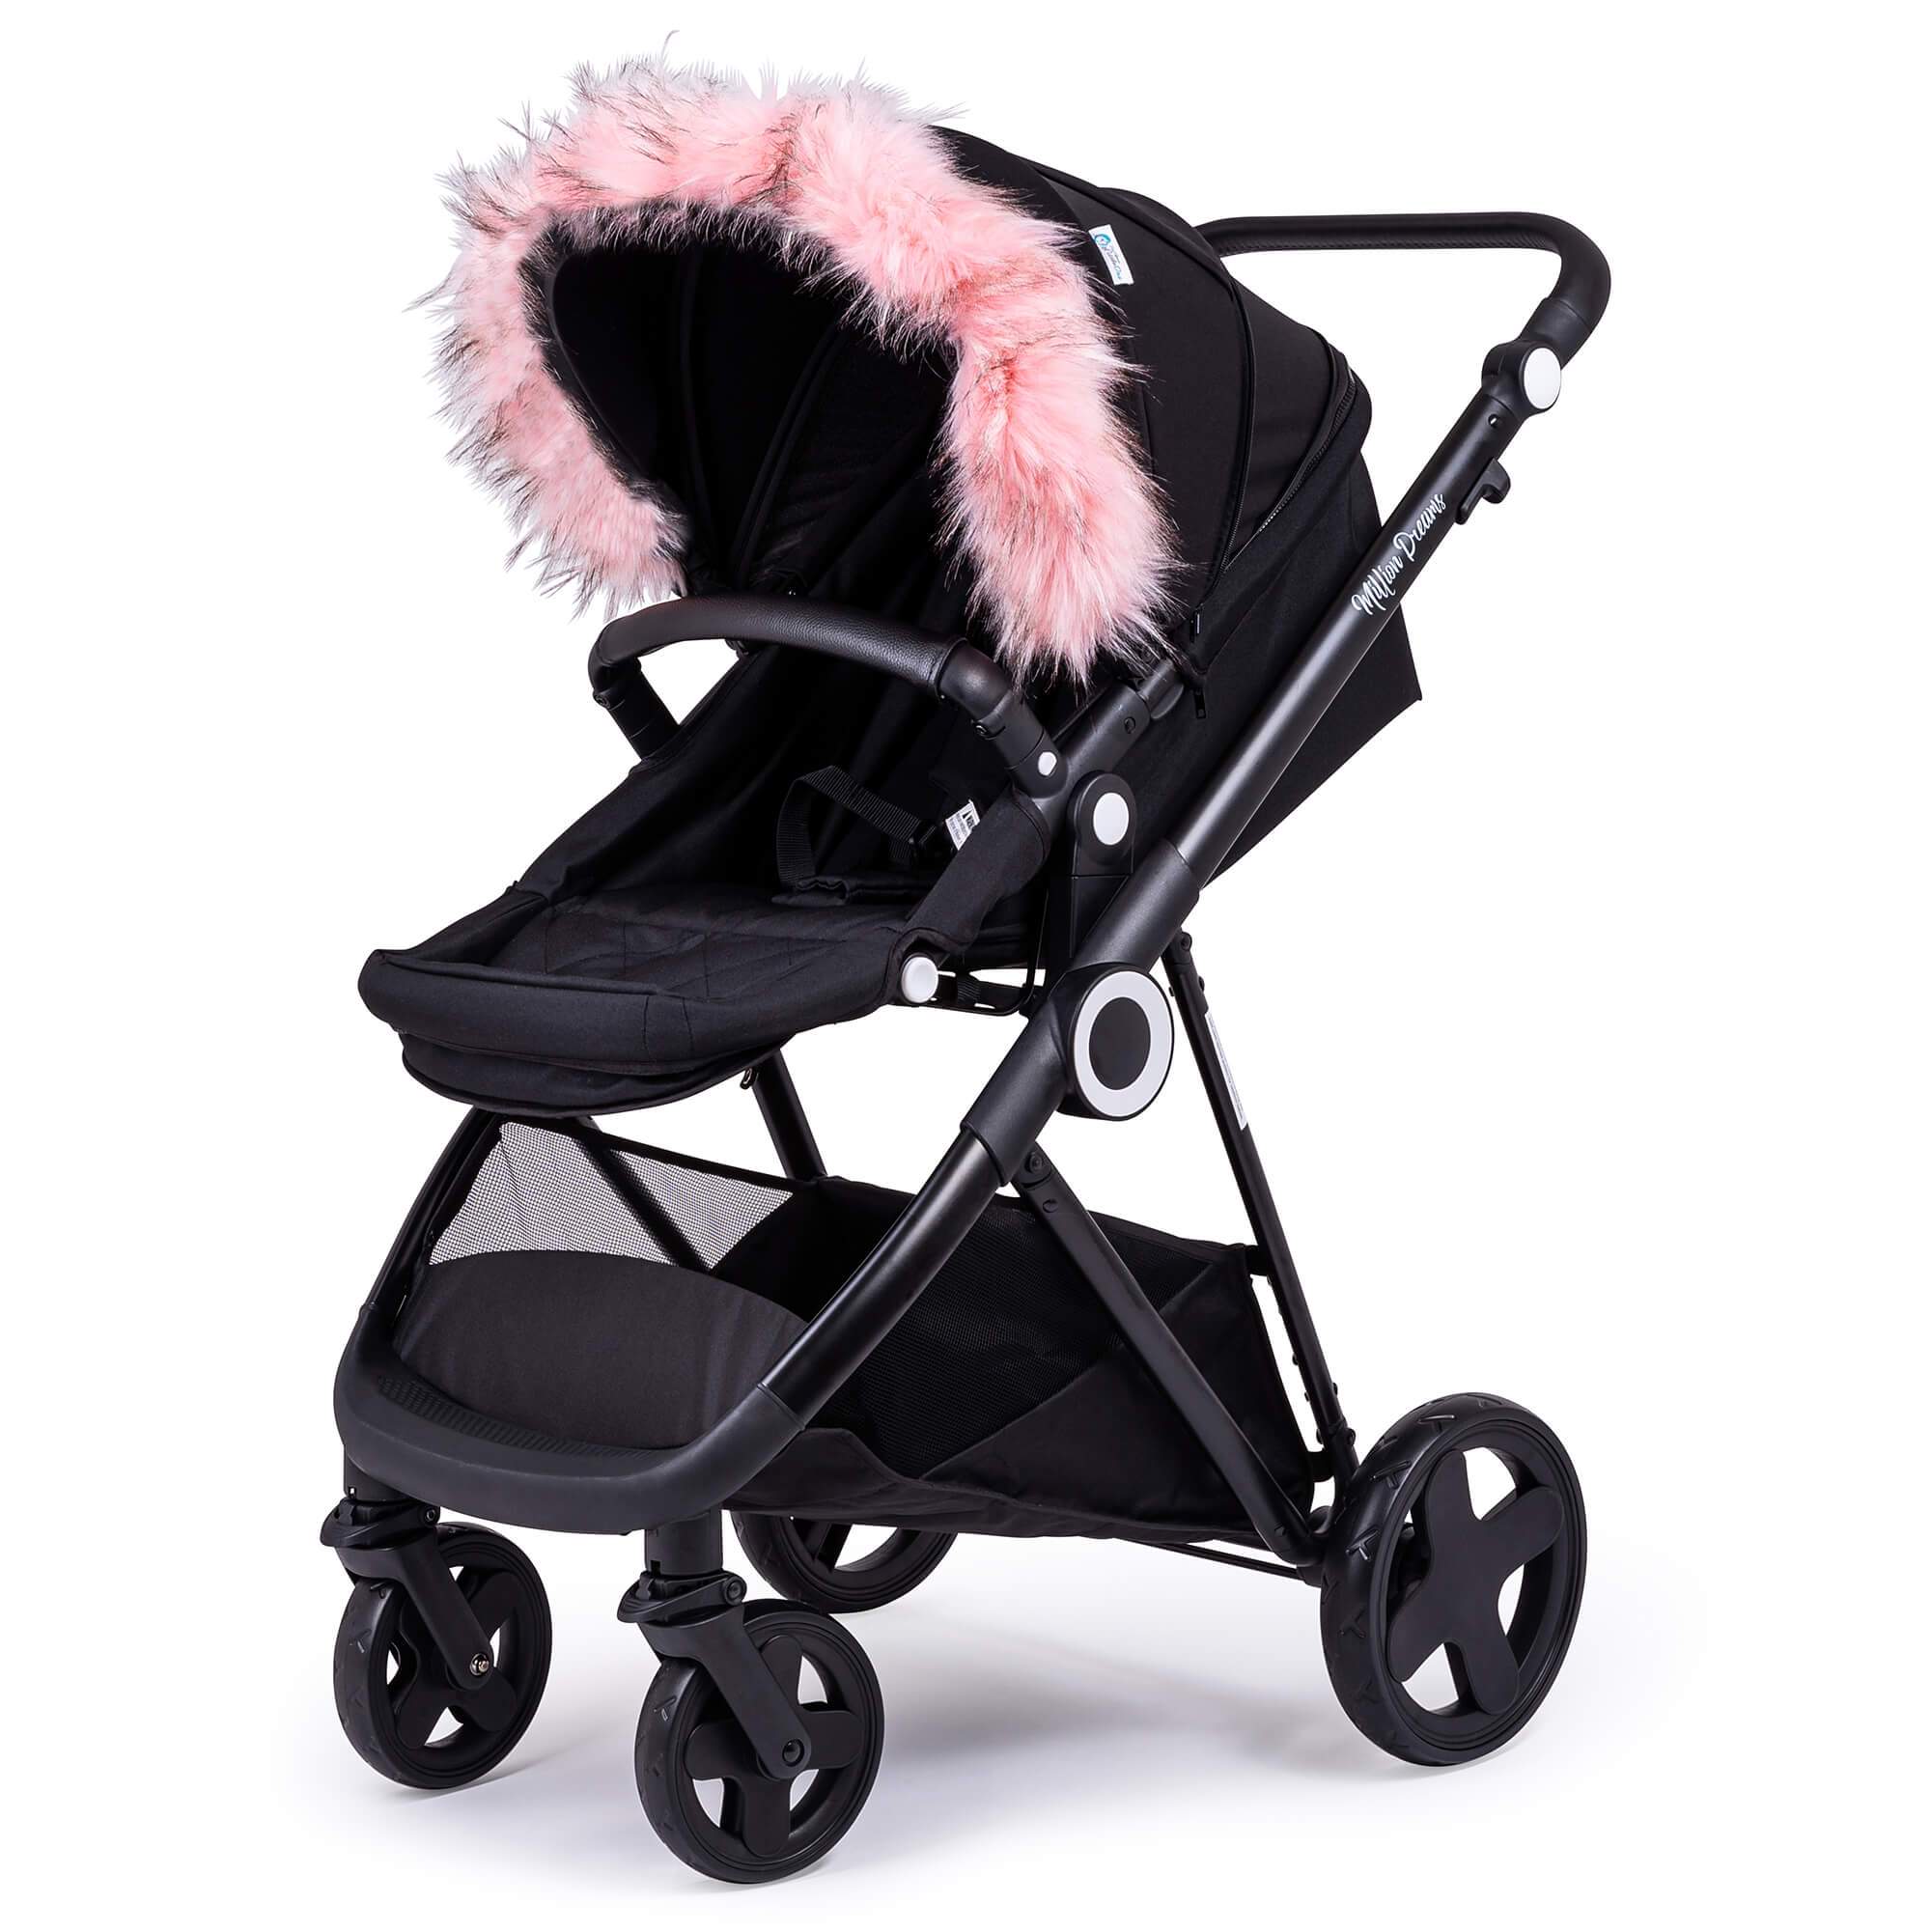 Pram Fur Hood Trim Attachment for Pushchair Compatible with Silver Cross - Light Pink / Fits All Models | For Your Little One